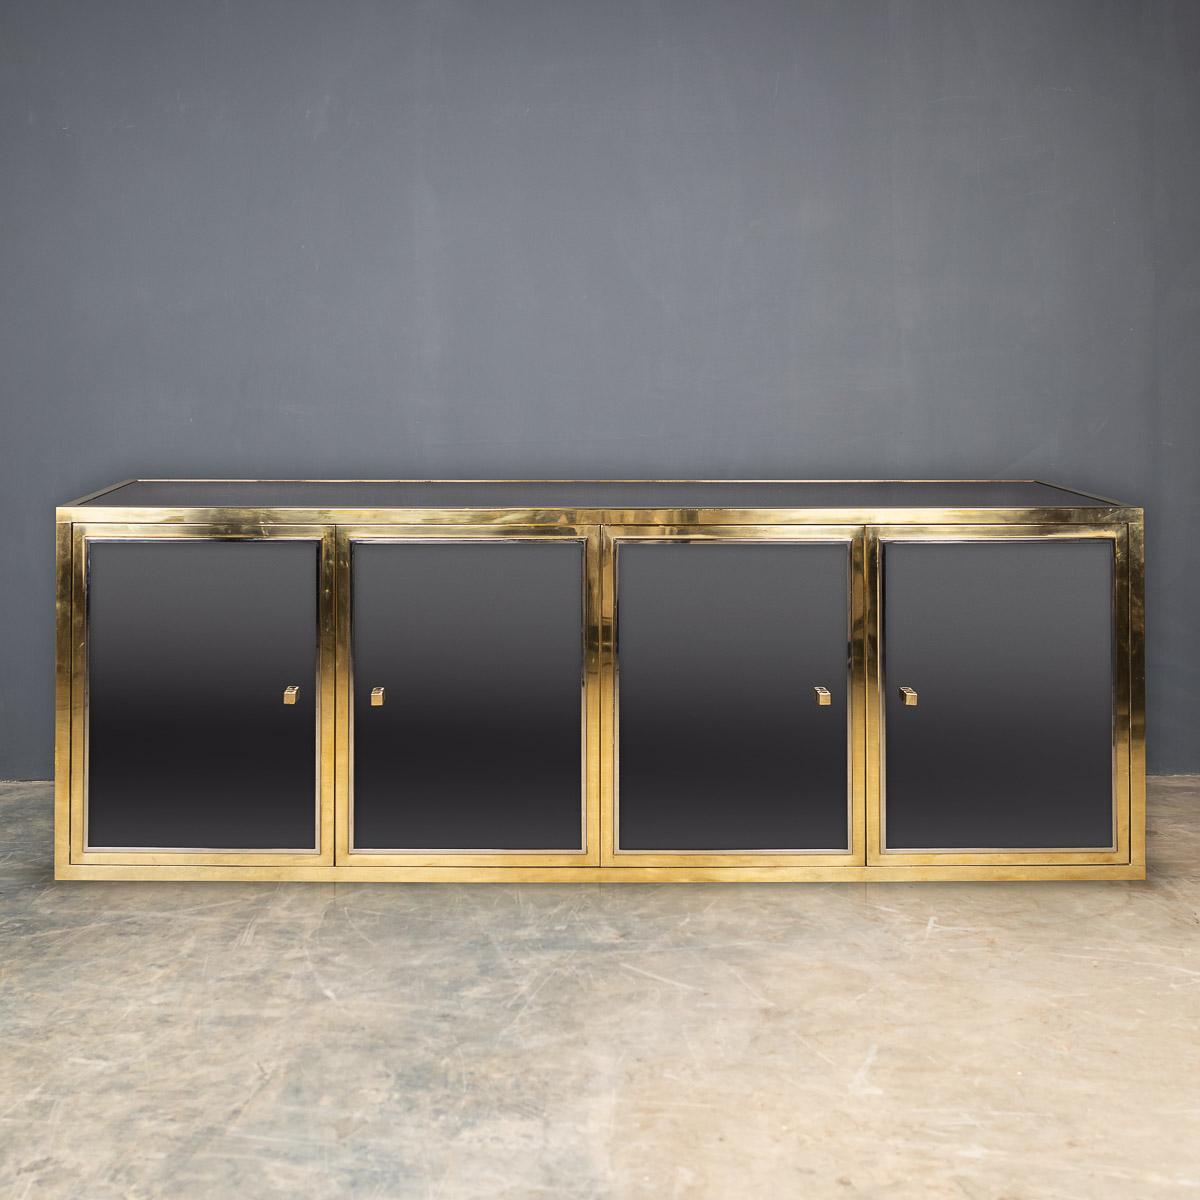 A large mirrored credenza / sideboard designed by Michel Pigneres, with four brass and chrome cupboard doors with mirrored inserts and mirrored top, the side with laminated shelves.

Condition
In great condition - wear consistent with